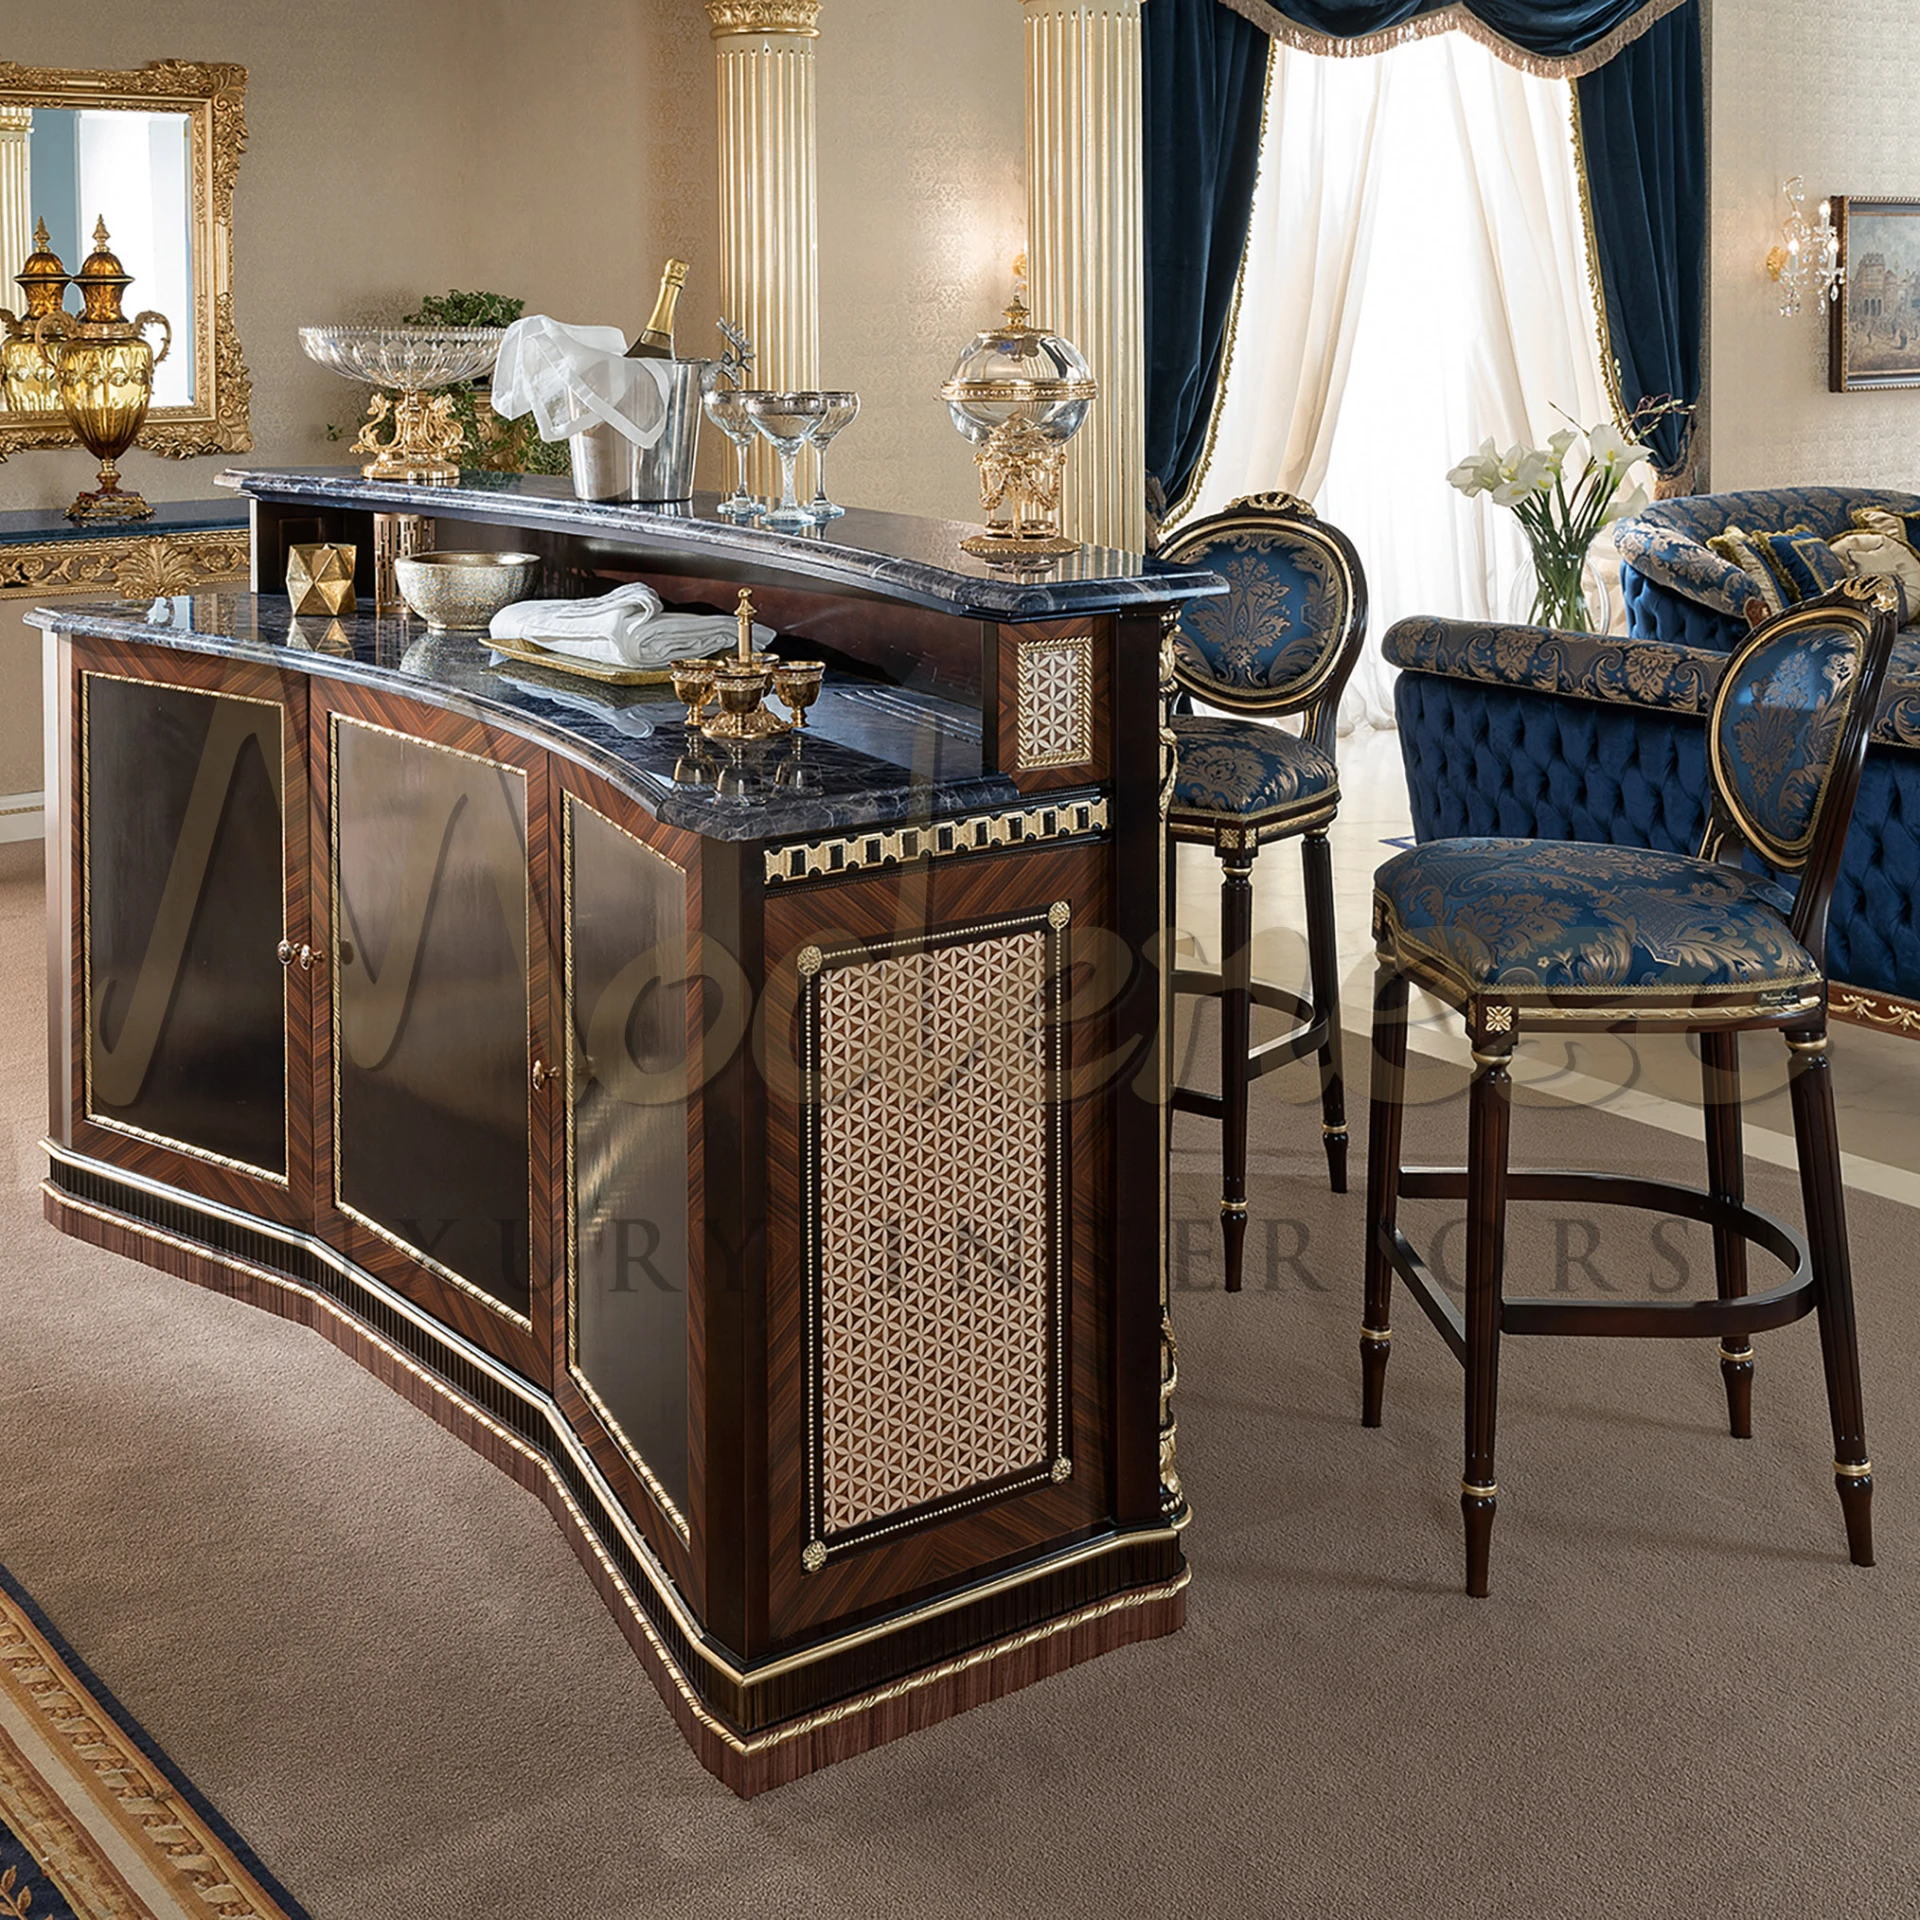 Precisely crafted black stool with gold leaf embellishments. A refined addition to the Modenese Home Bar, fit for upscale residences.